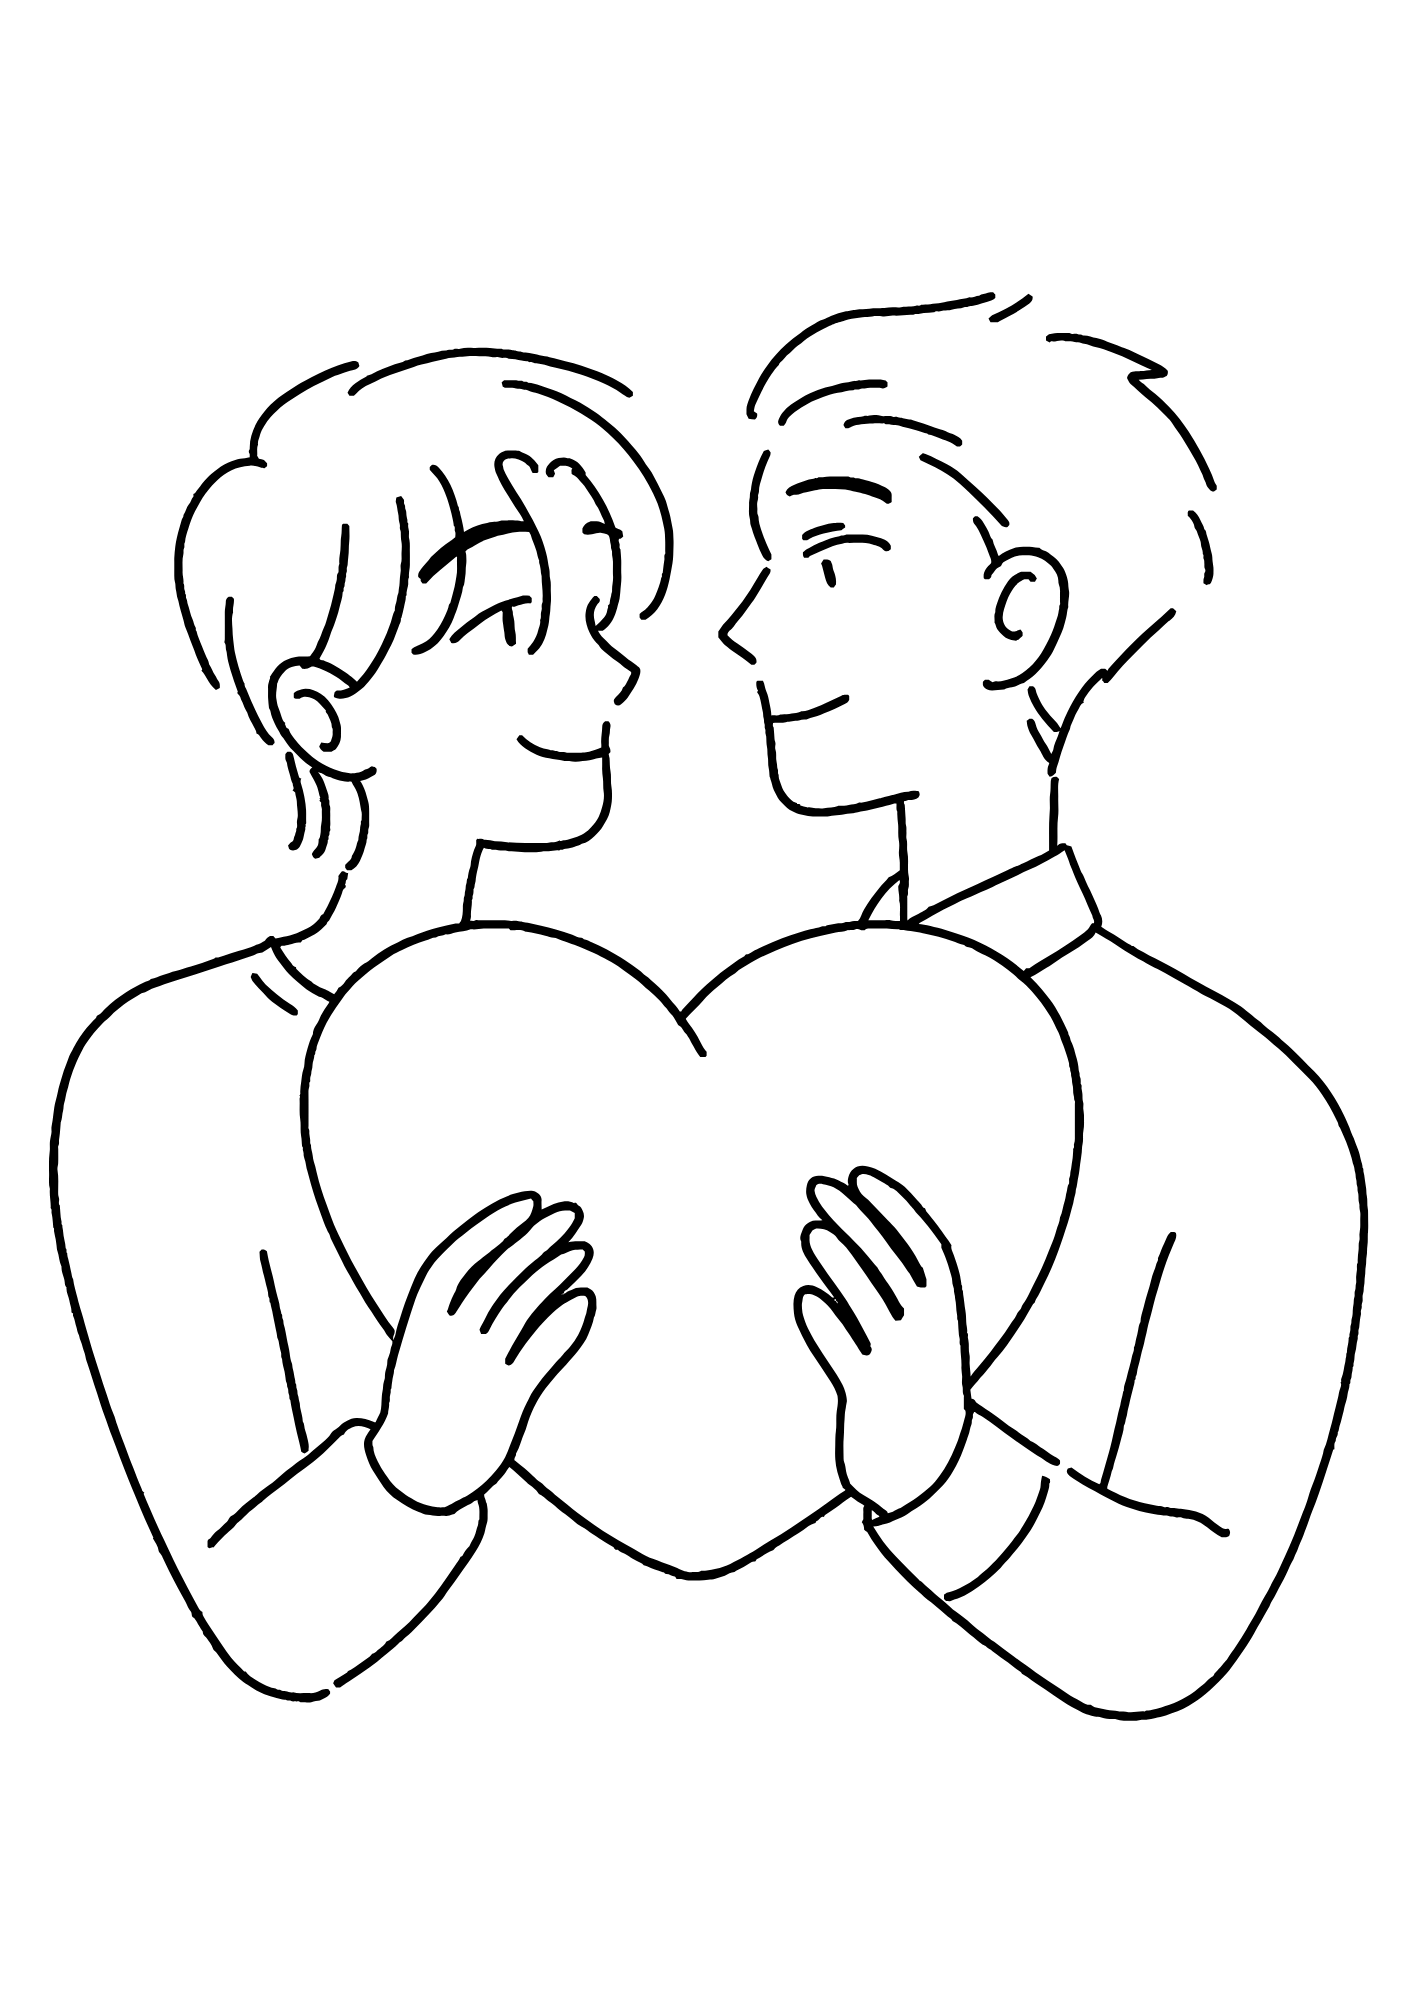 Valentine Heart Couple Coloring Page